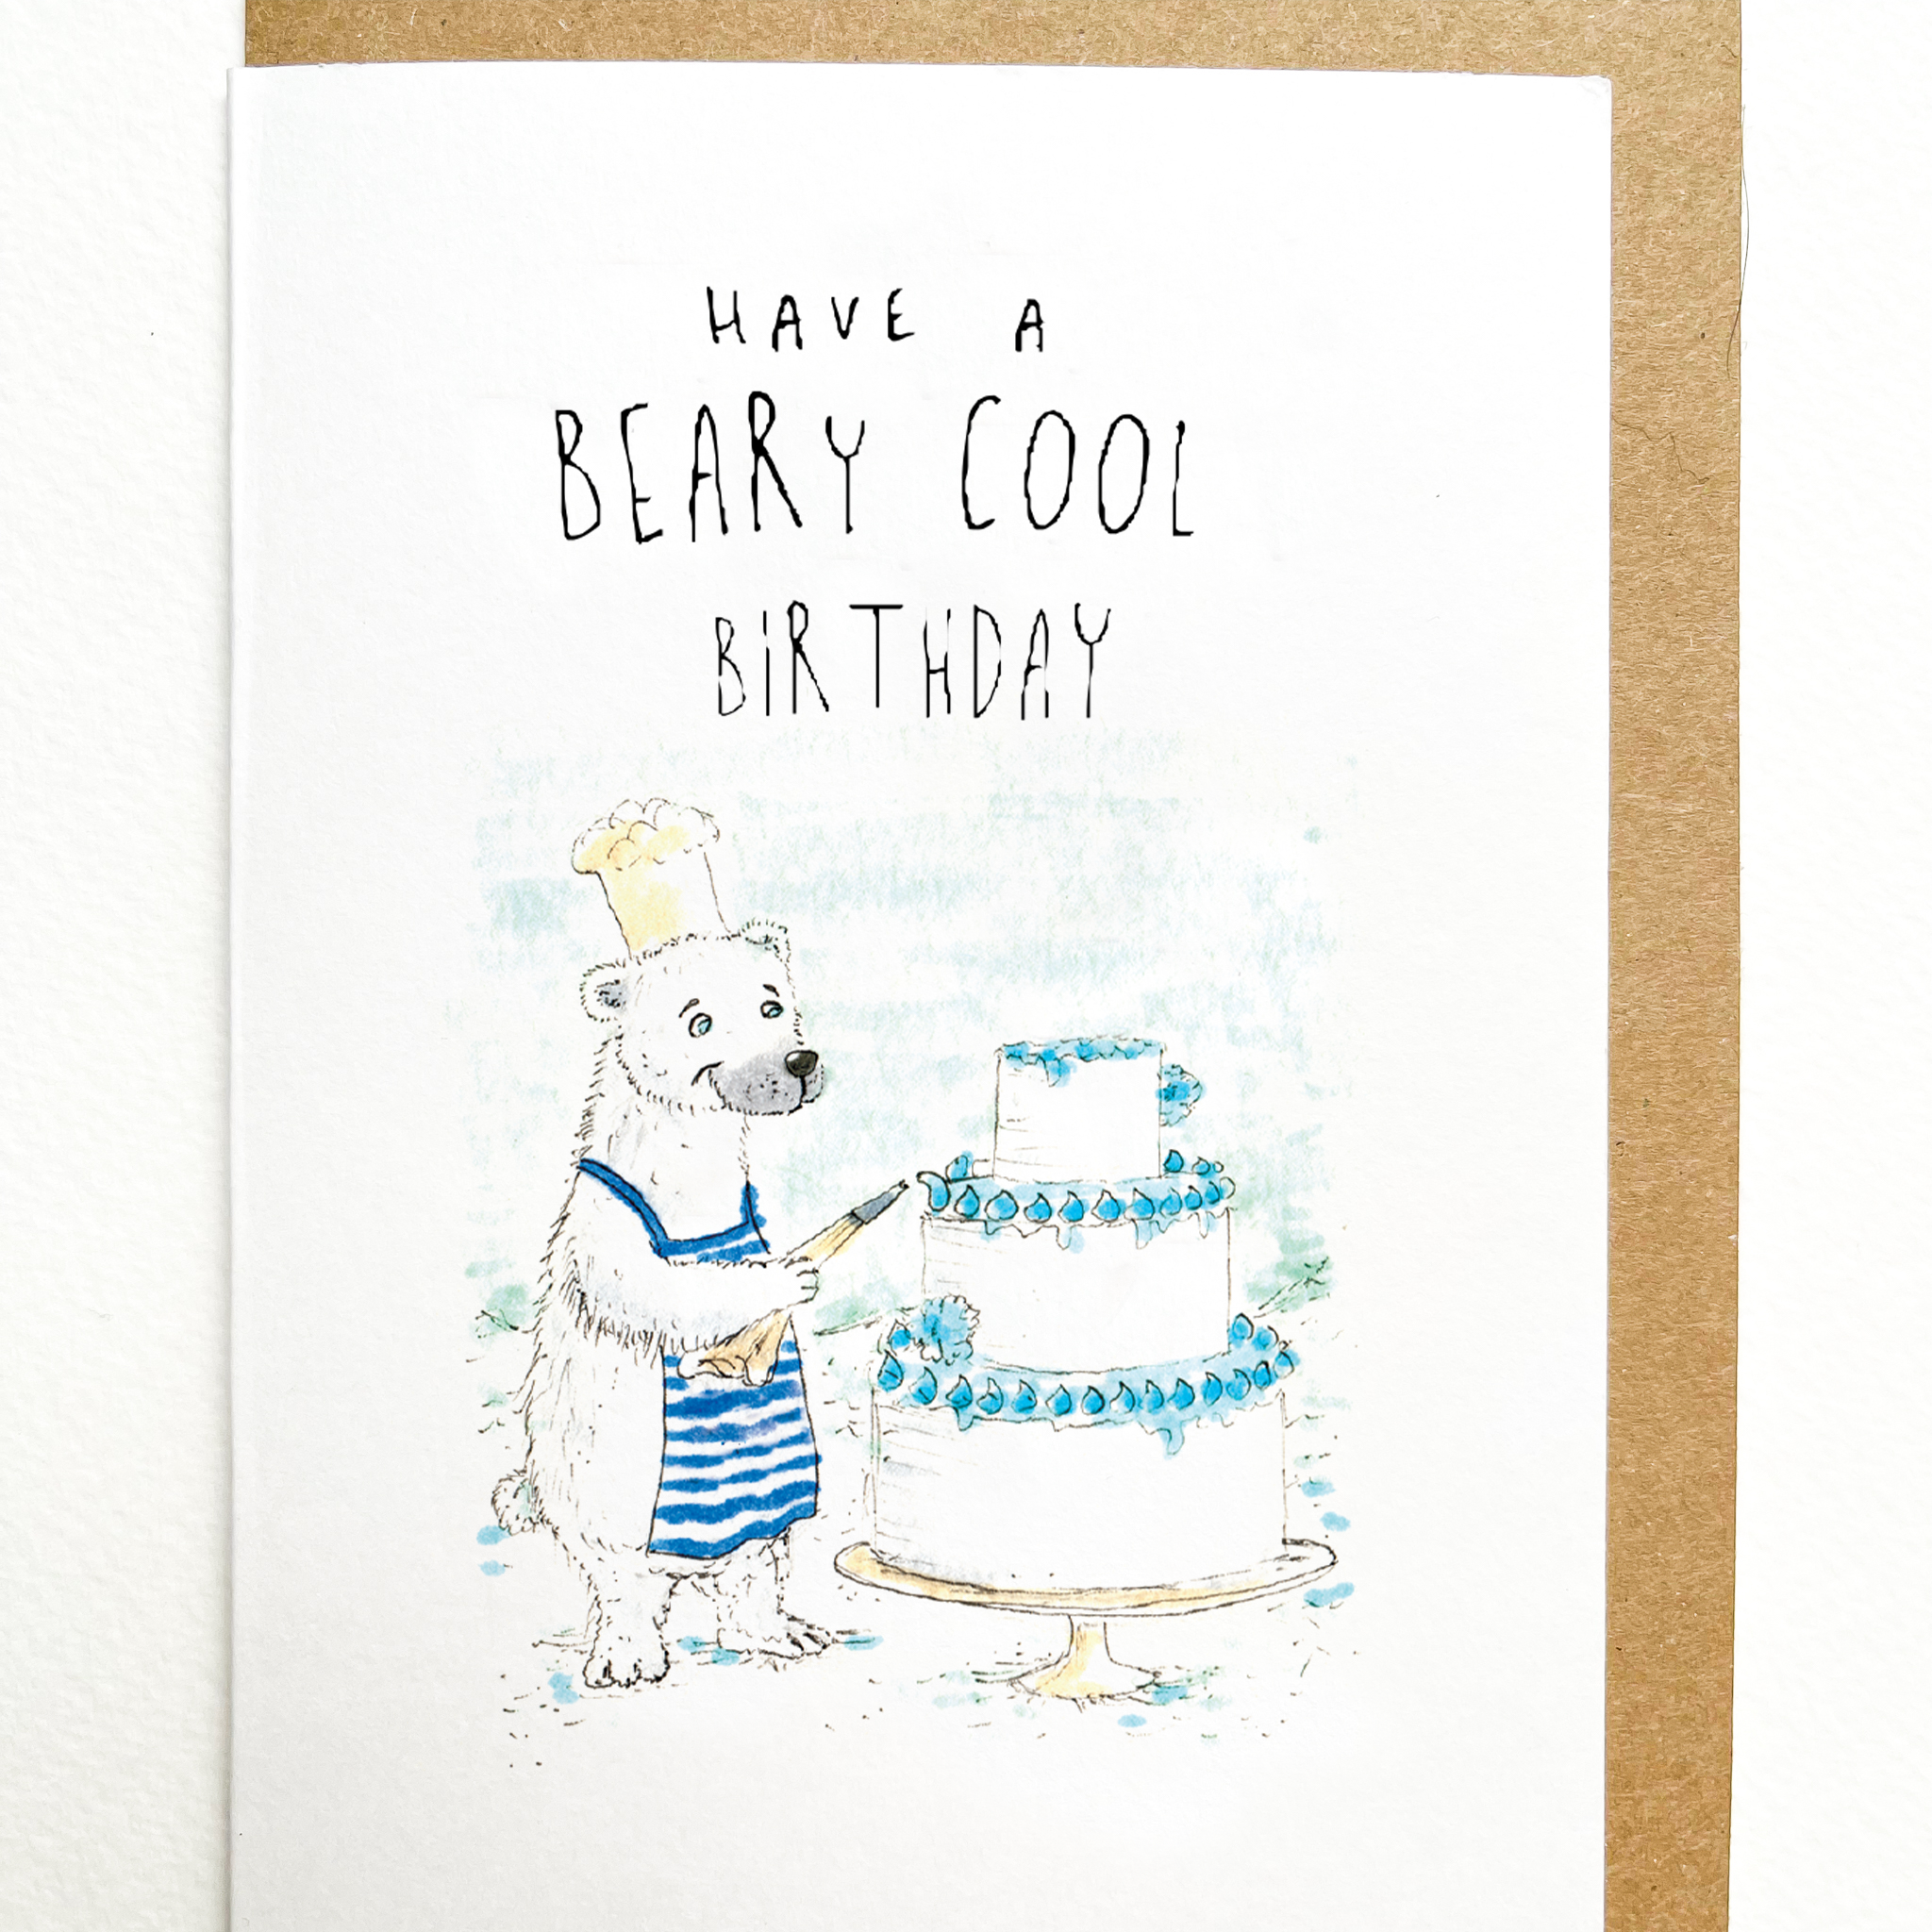 Have a Beary Cool Birthday - Well Drawn